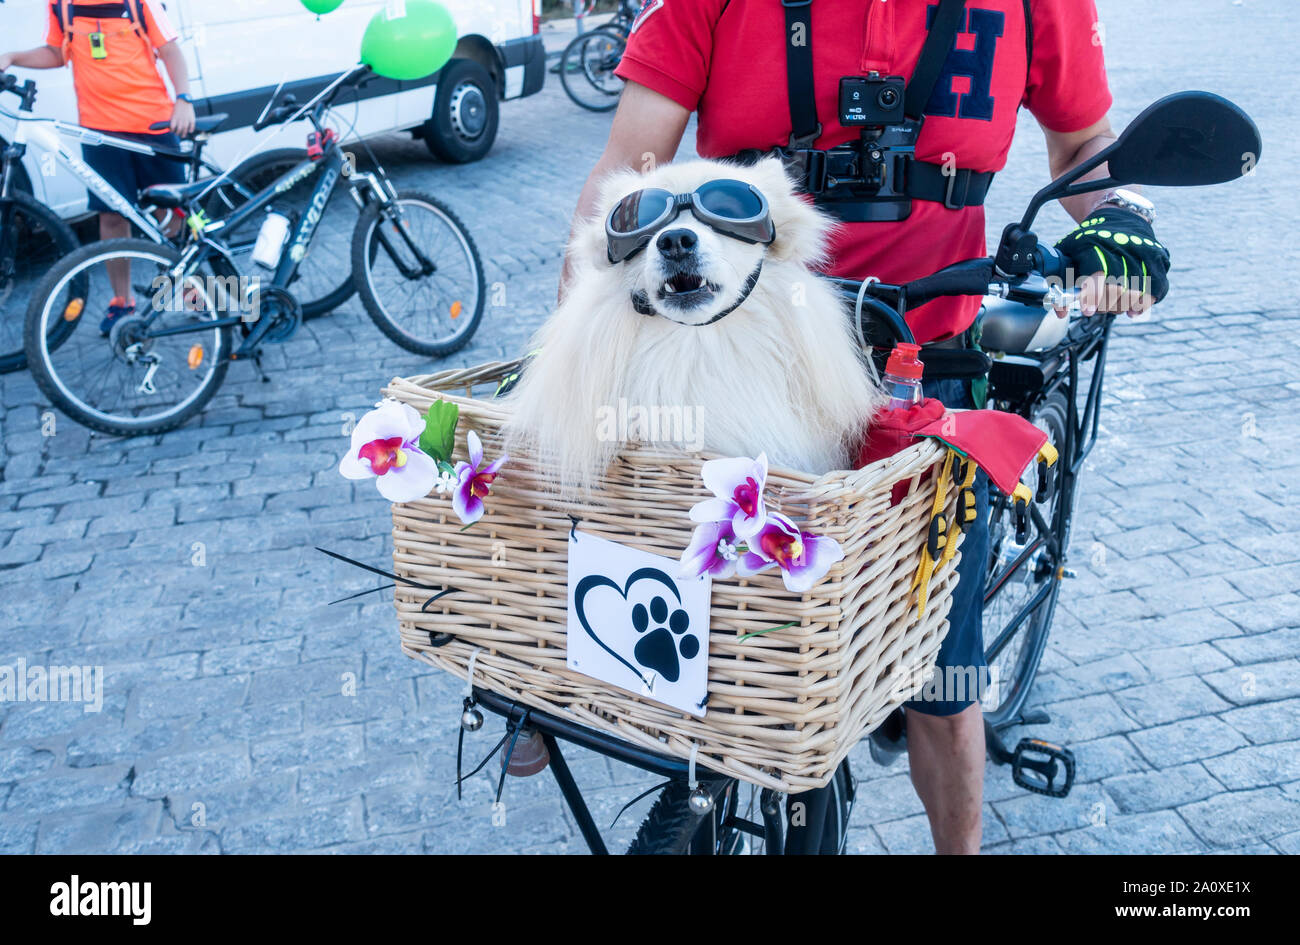 Pomeranian dog wearing sunglasses/goggles, riding in basket on front of bicycle. Stock Photo